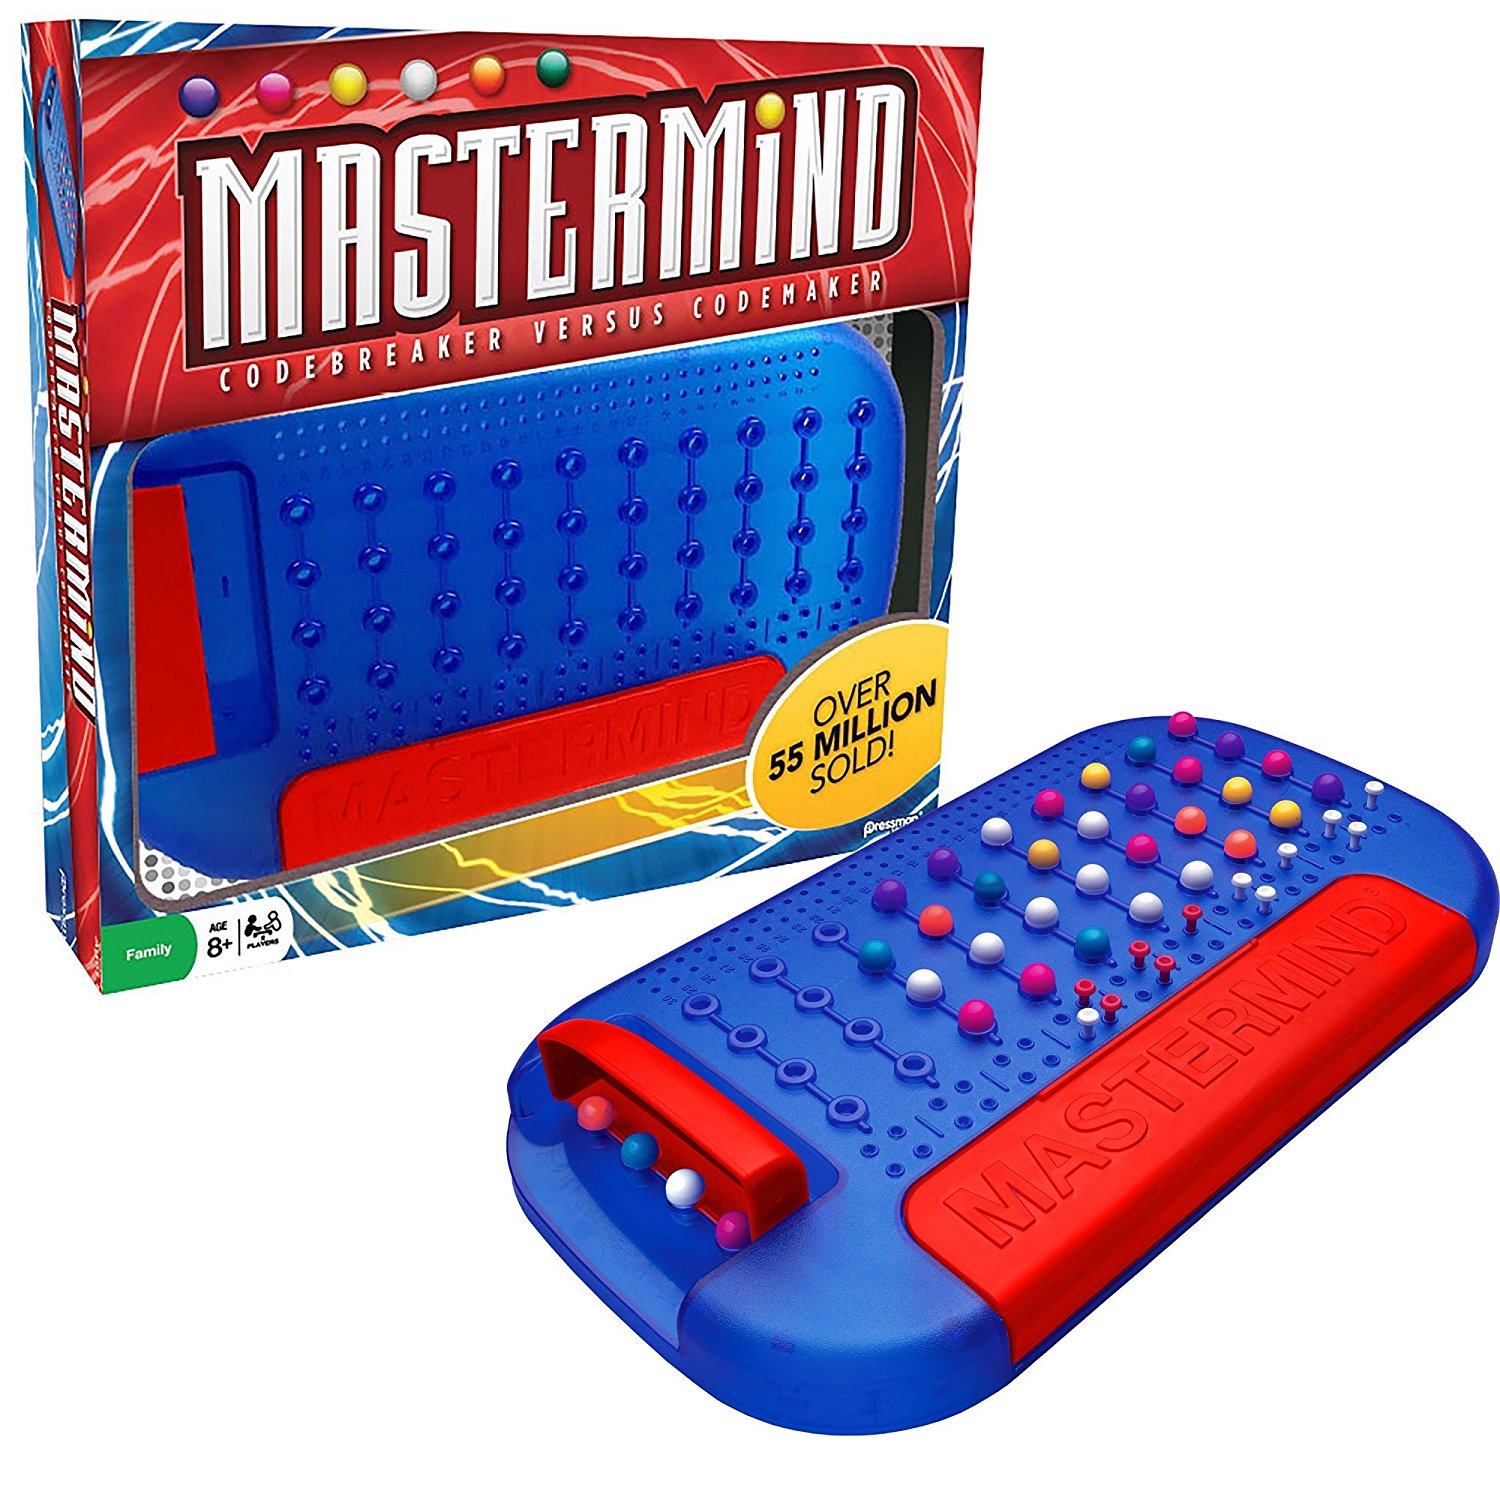 Enjoy Puzzles, Riddles, Mystery? Play the Game of Mastermind